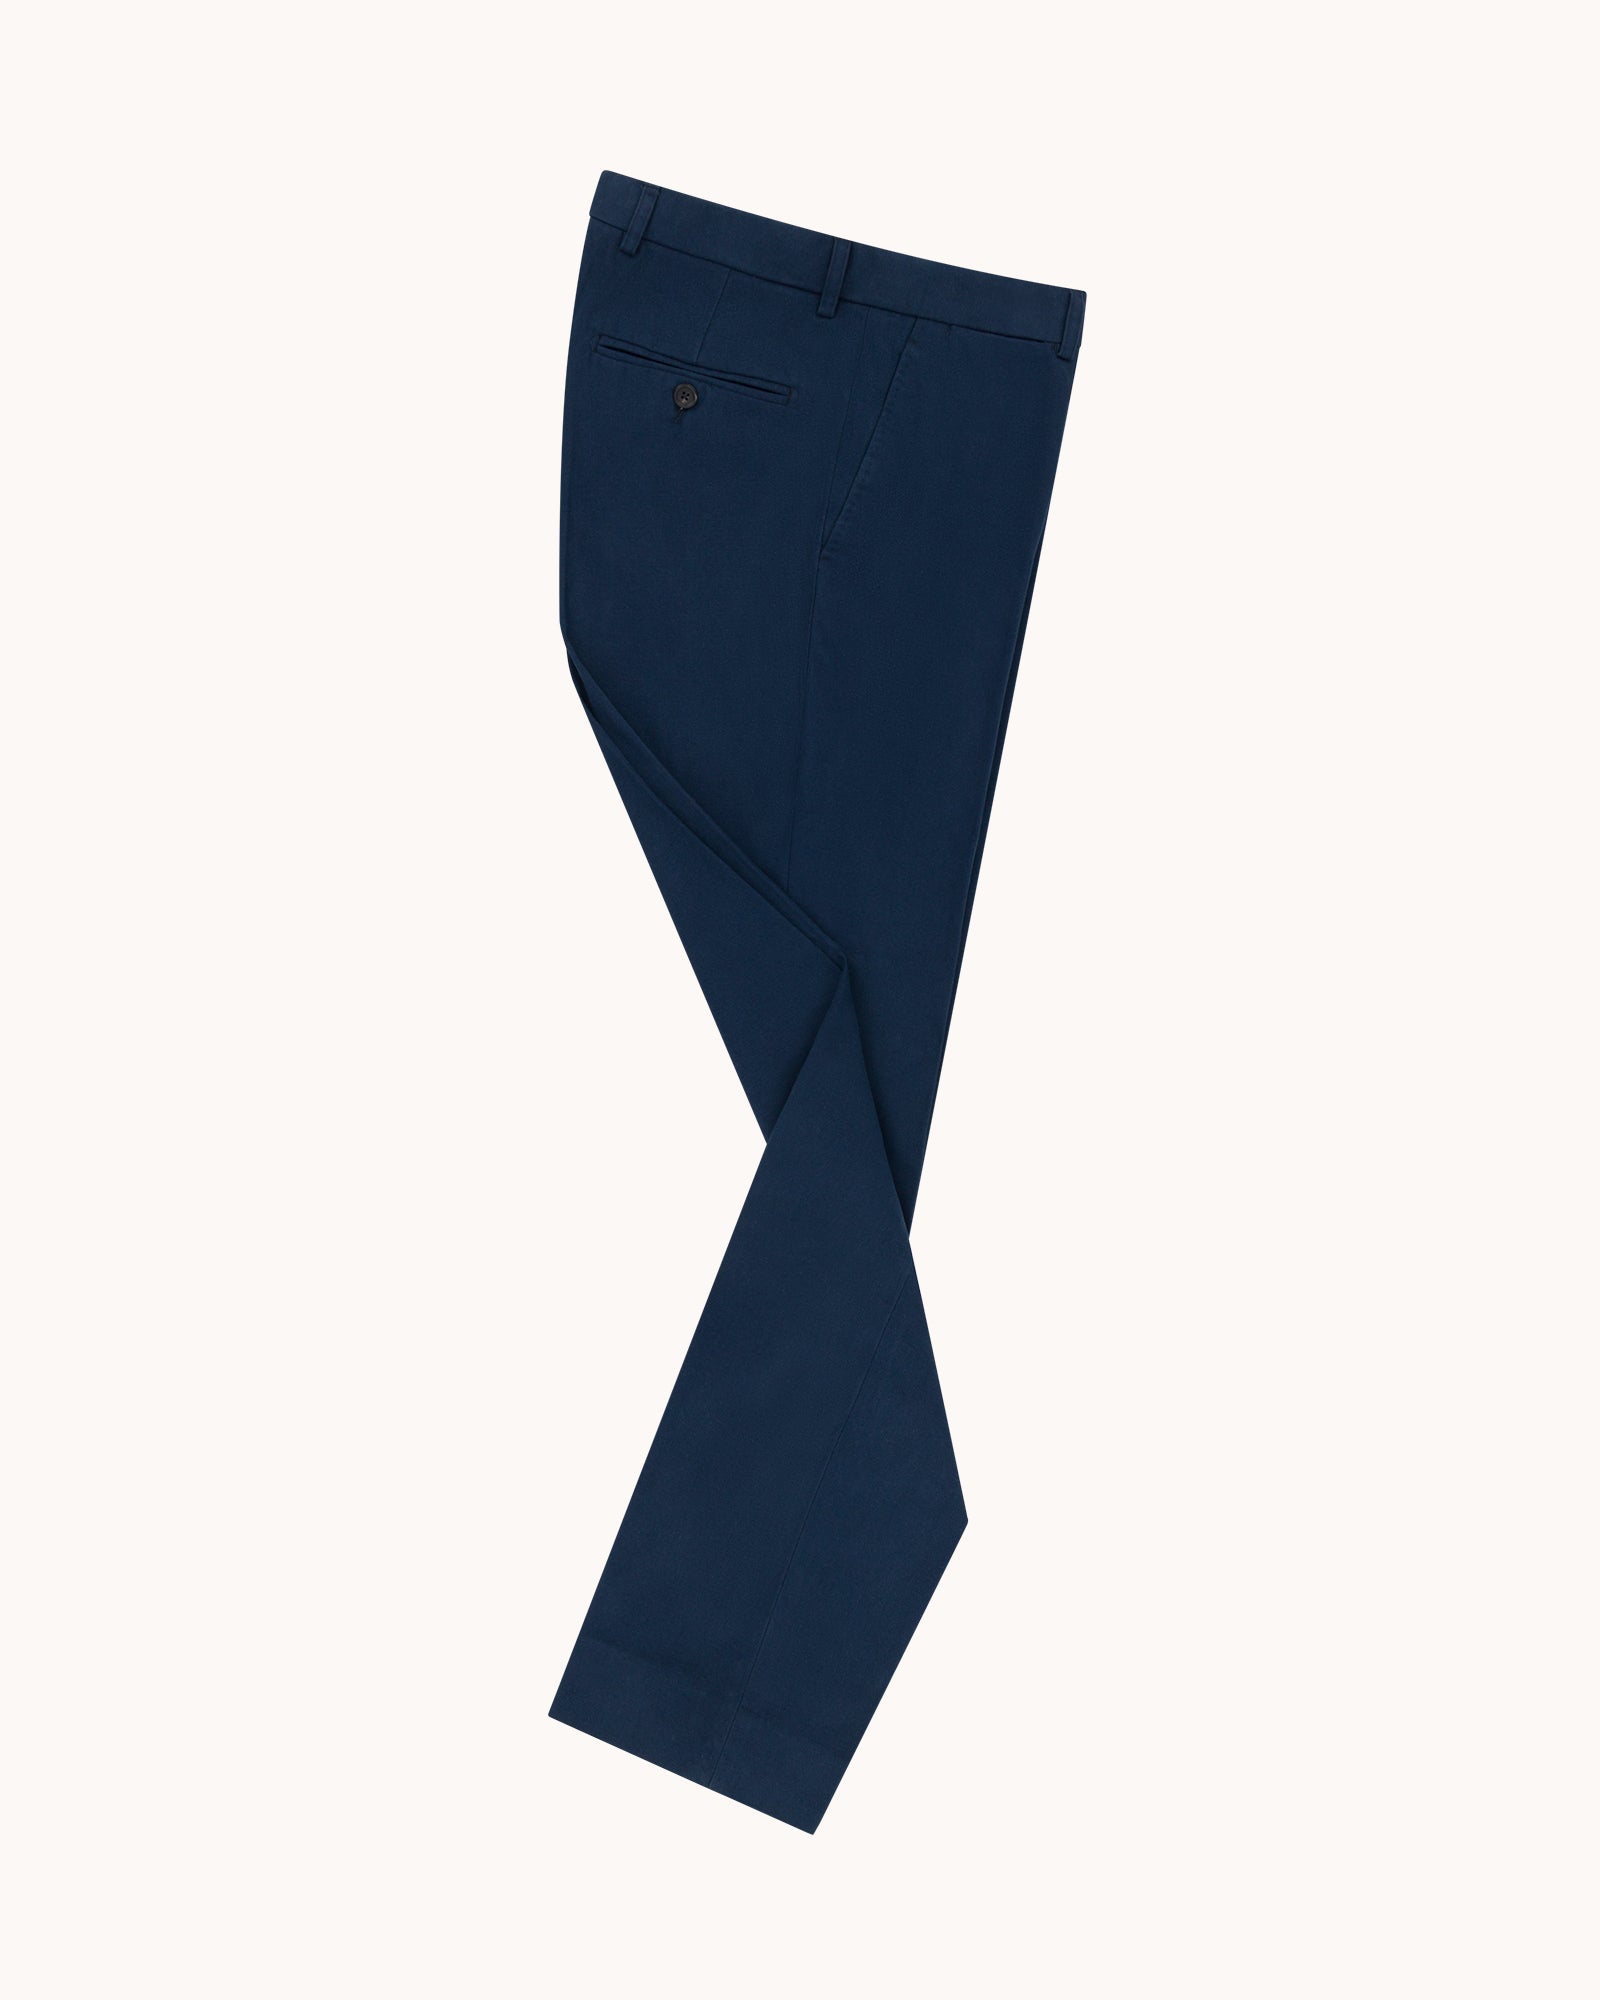 Garment Washed Flat Front Trouser - Navy Cotton Canvas